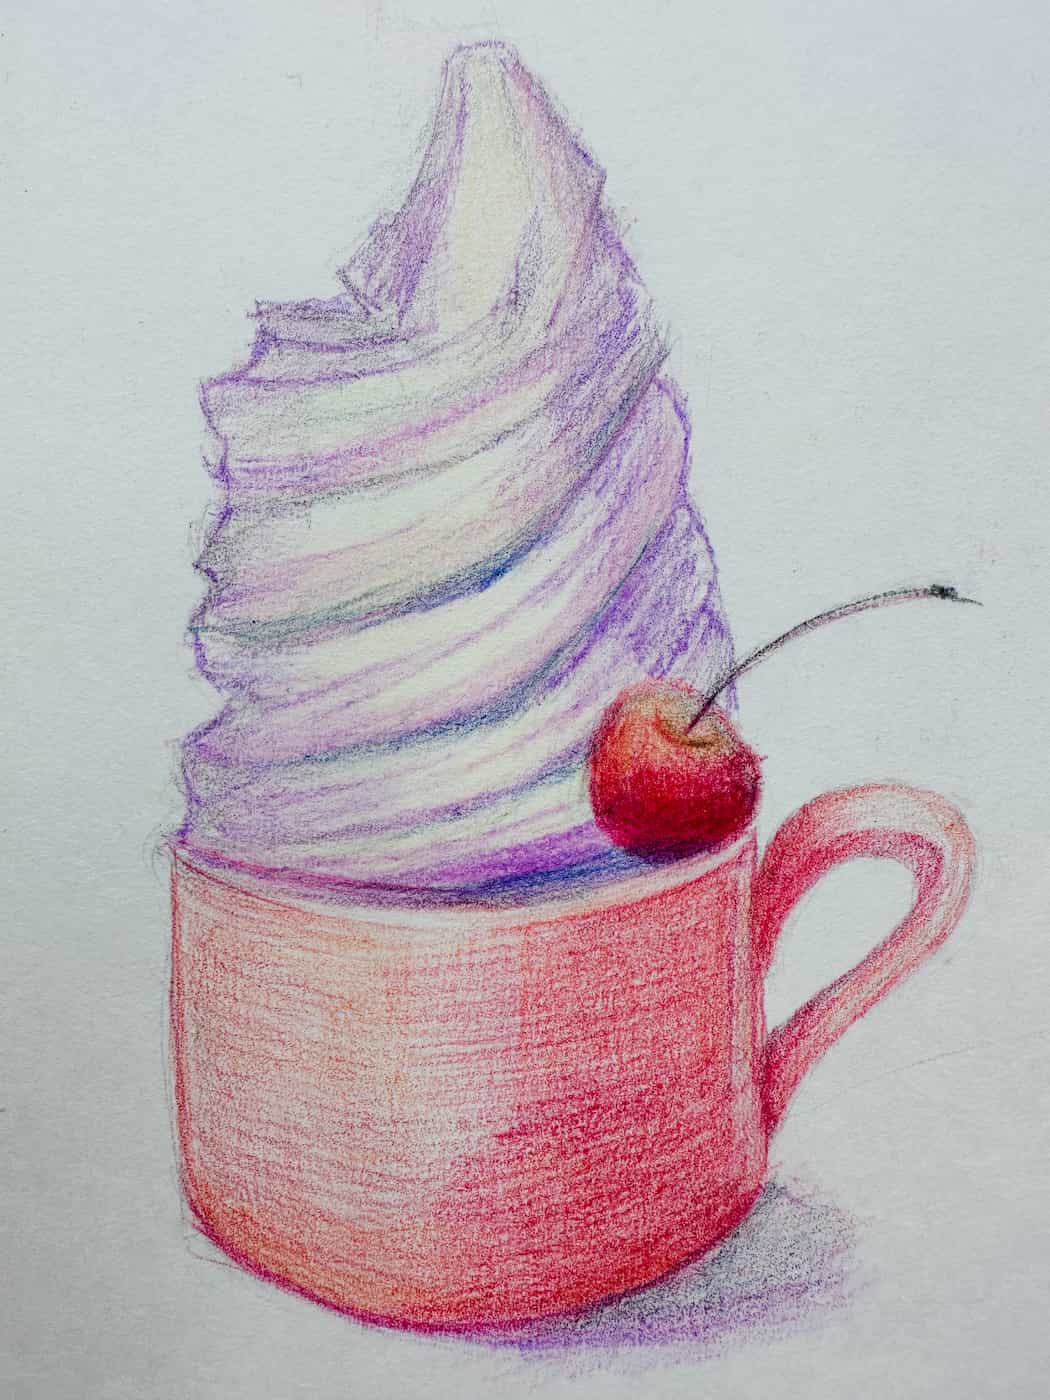 A drawing of a cup of ice cream with a cherry on top.